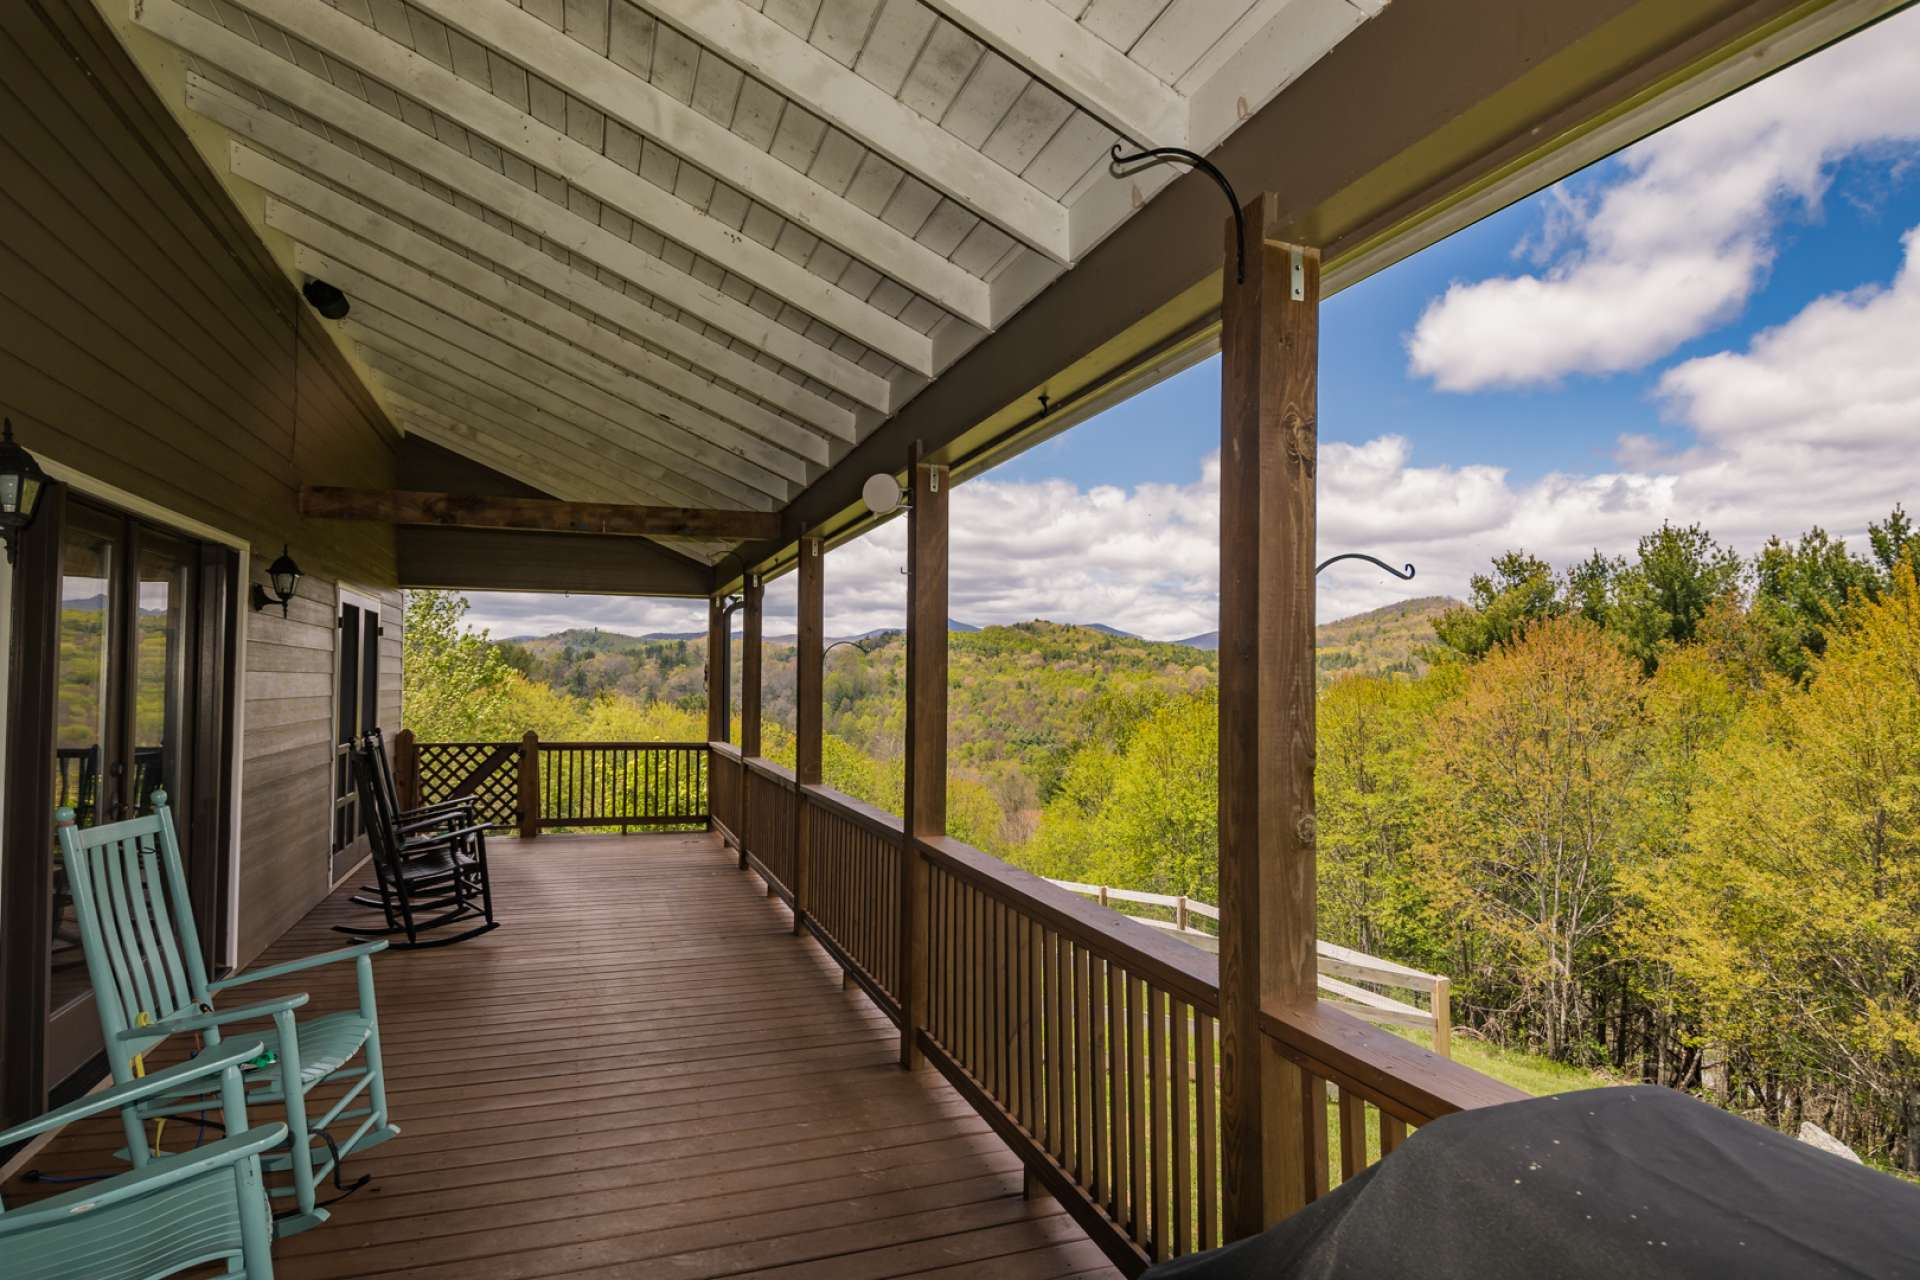 A full length covered deck offers a wonderful outdoor entertaining space. Or, simply enjoy the views while reading your favorite book.